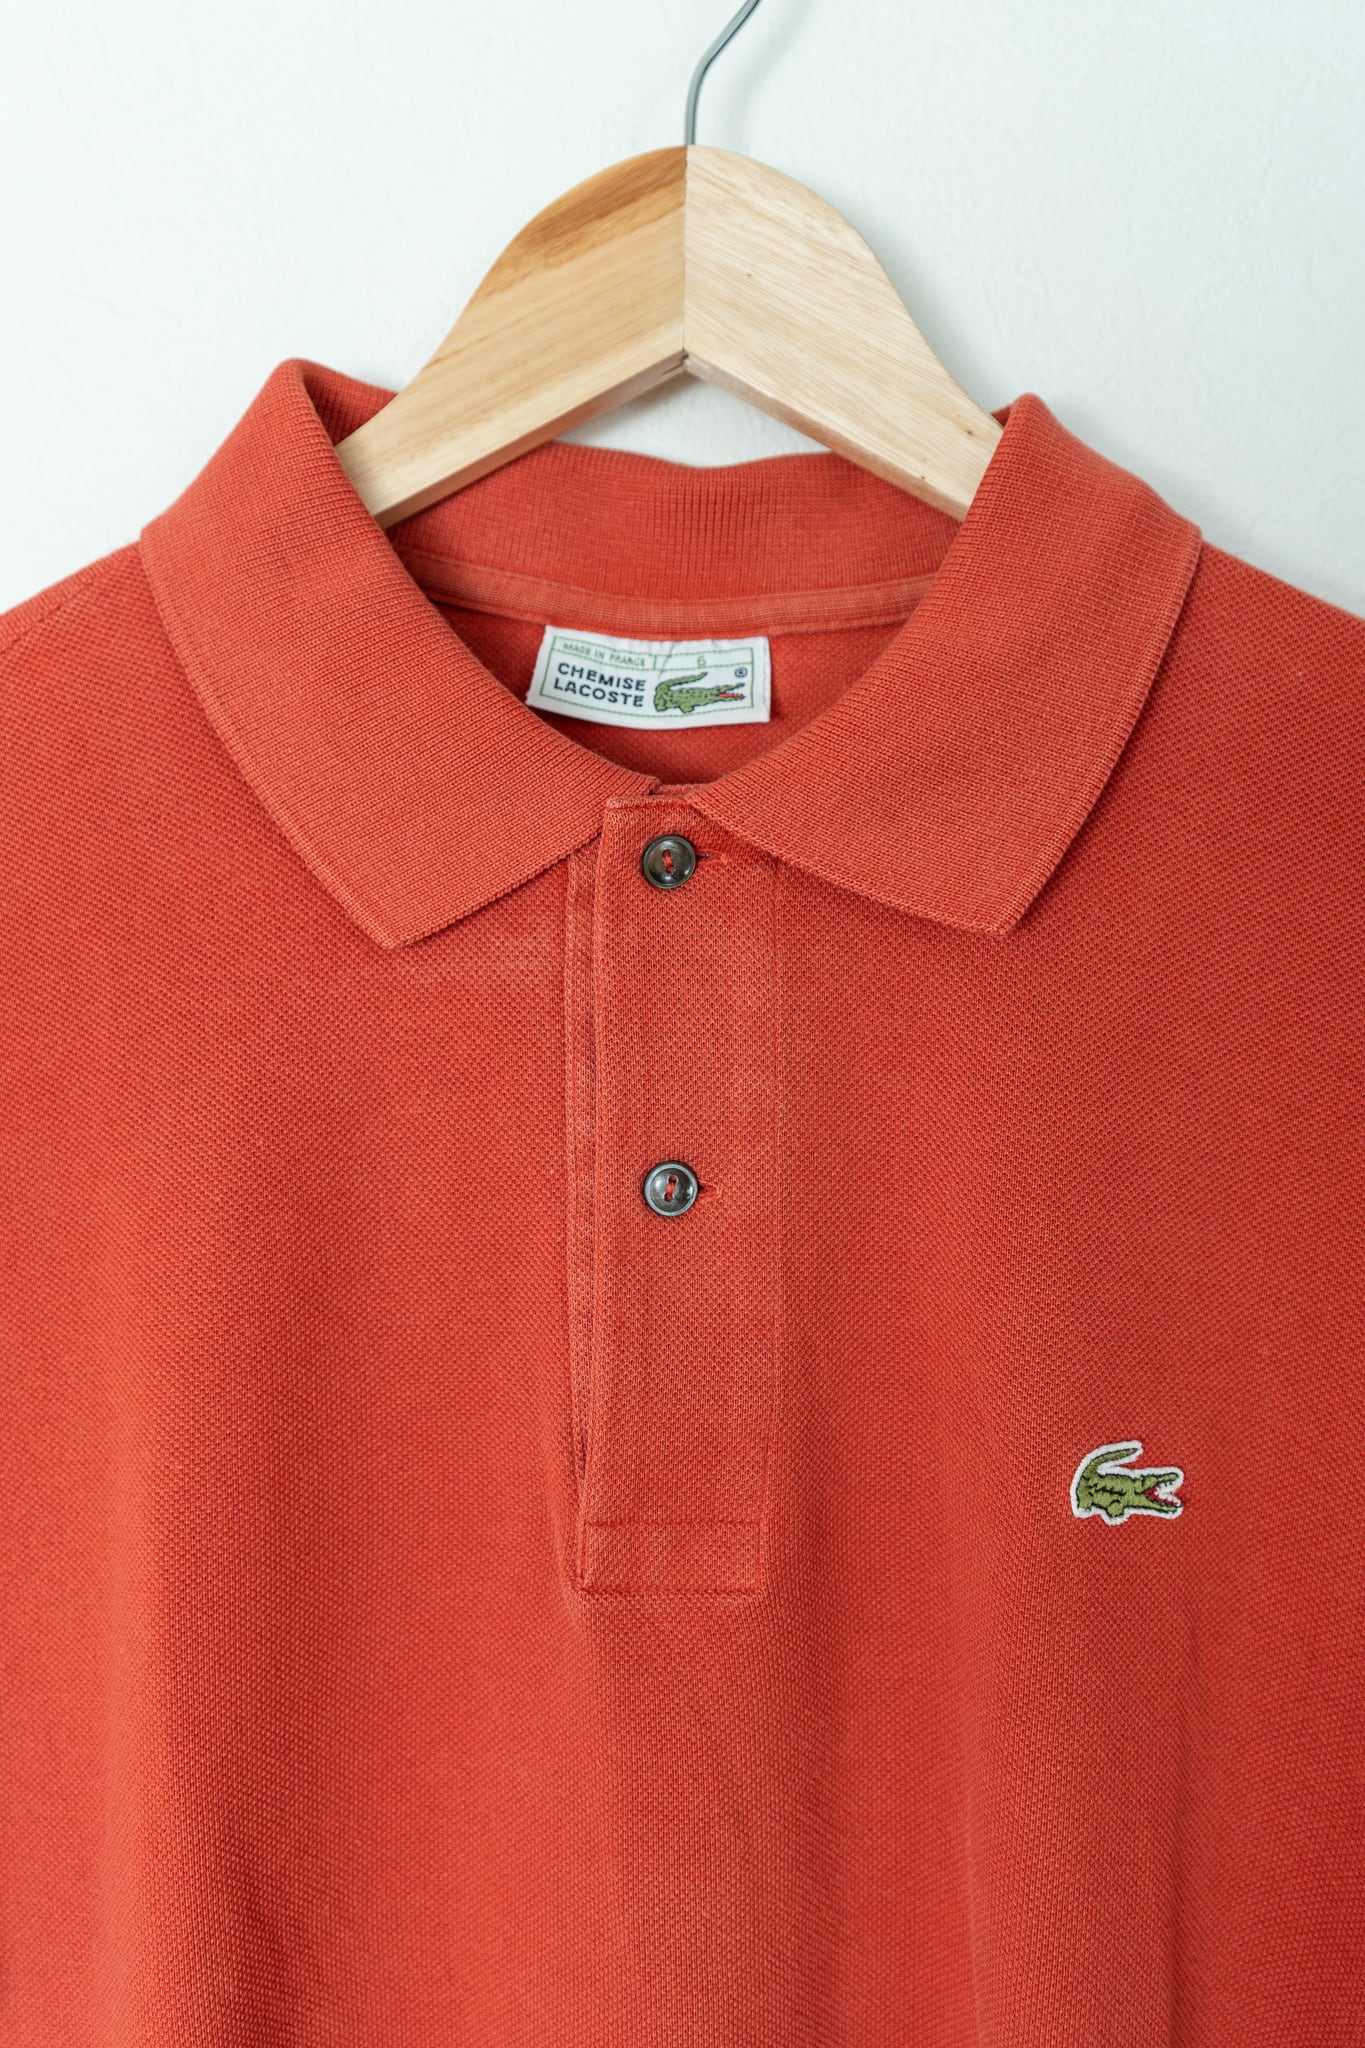 1970-80s】CHEMISE LACOSTE Polo Shirts Made in France フレンチ 